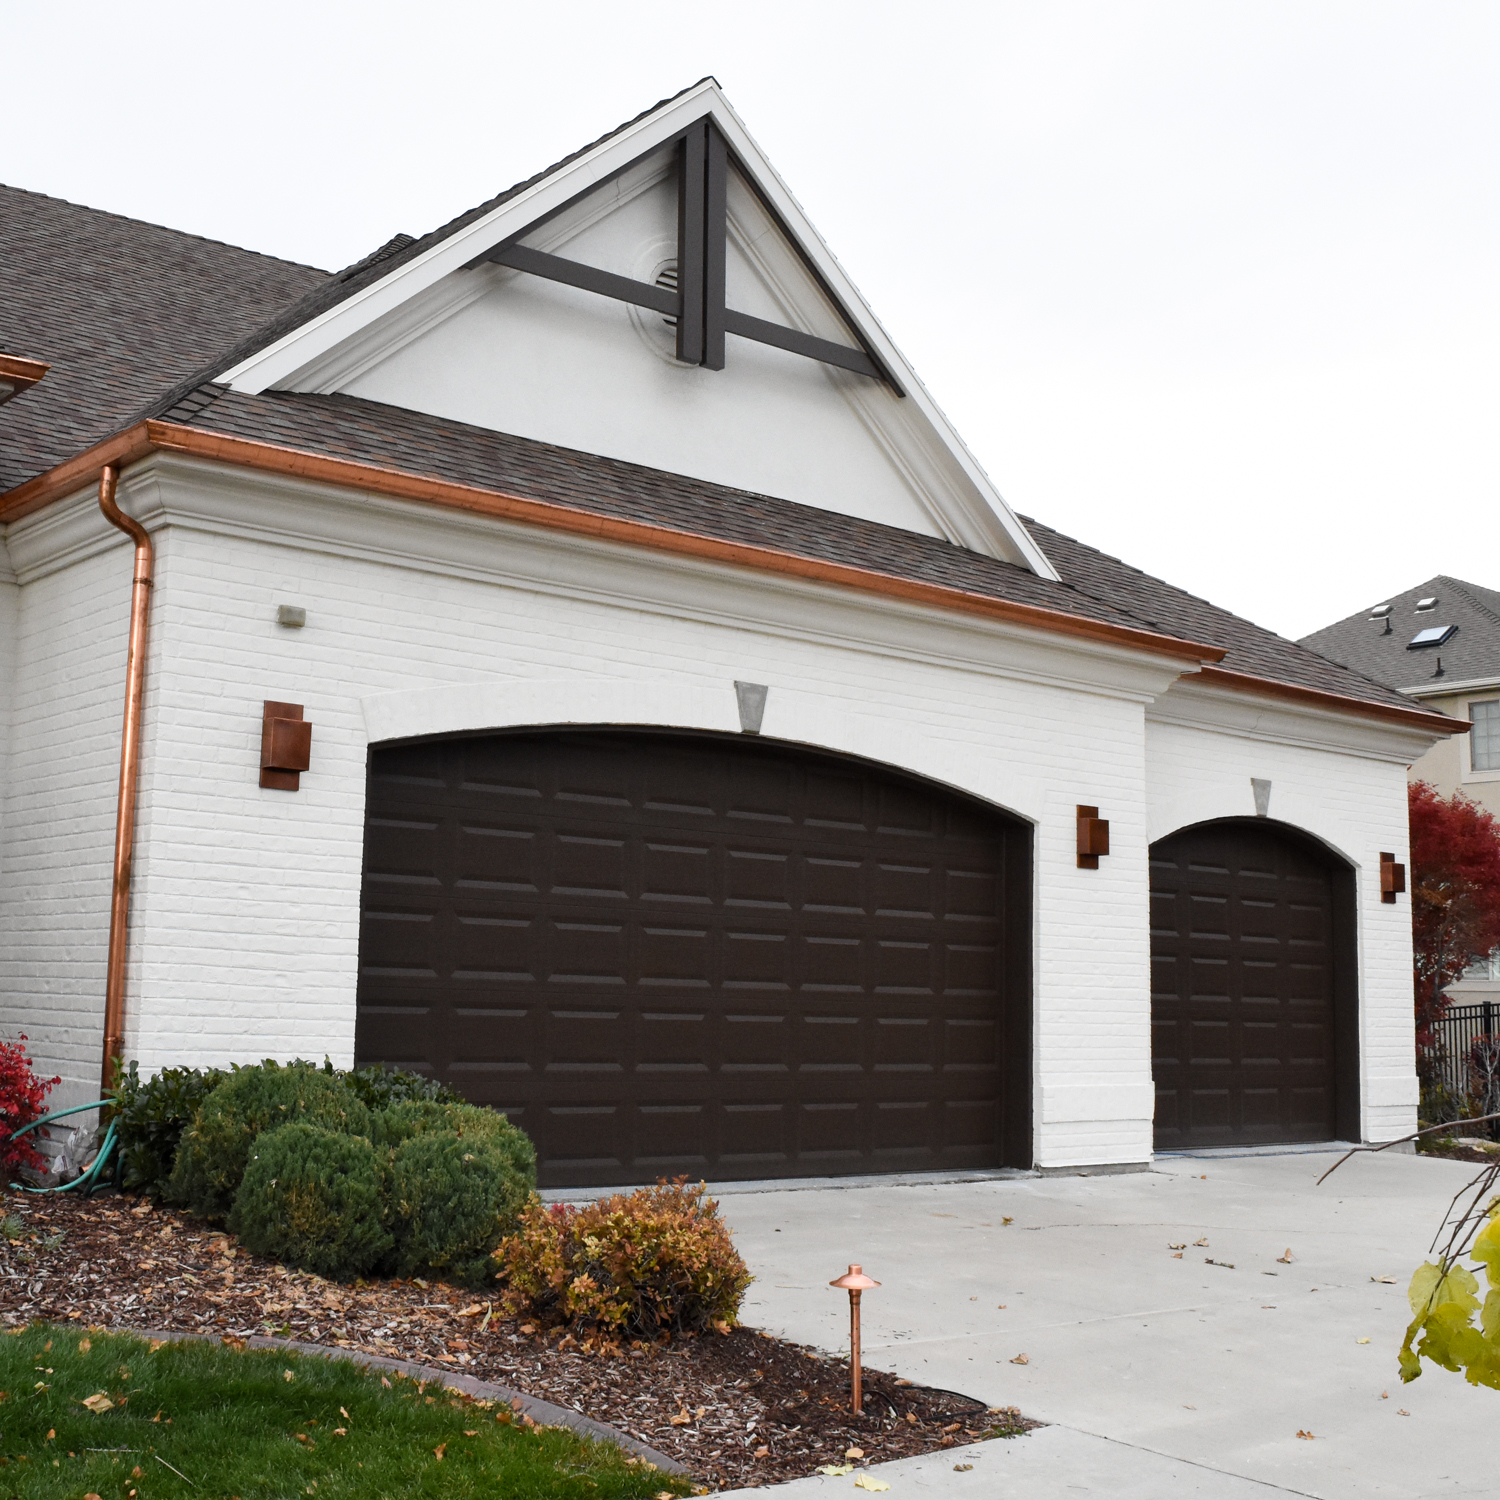 How to Choose an Exterior Paint Color for a Garage Door